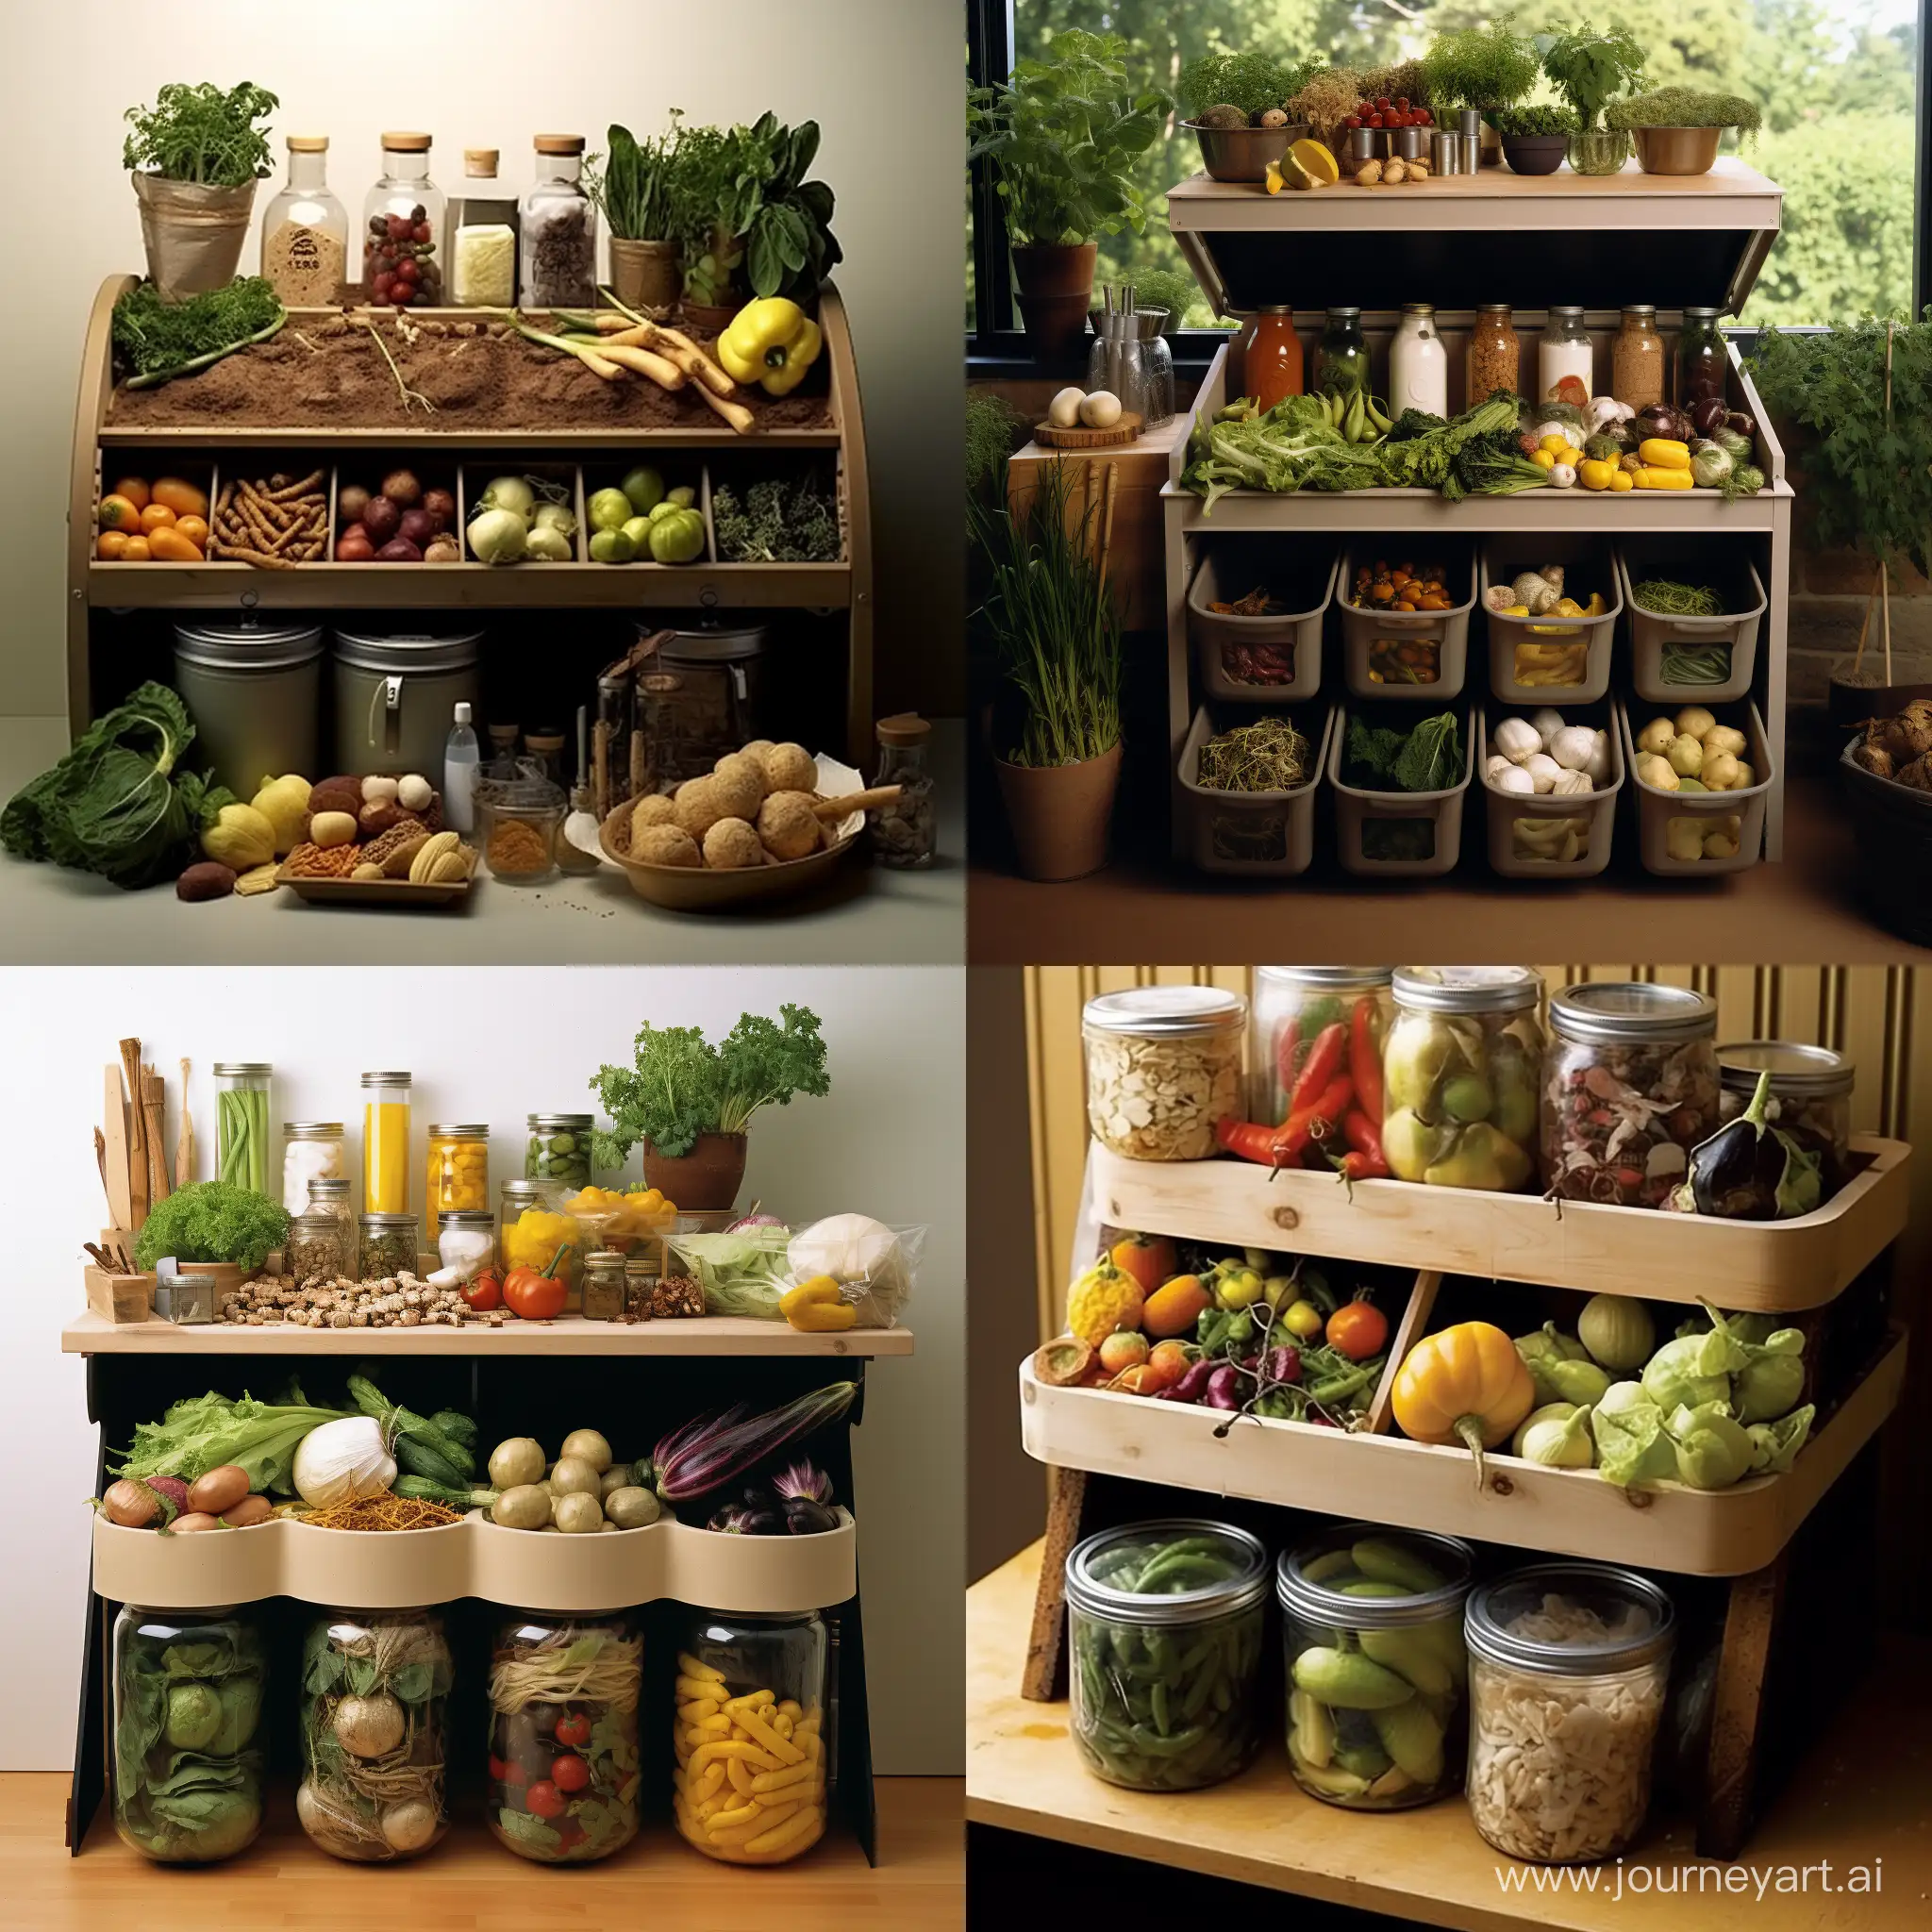 Kitchen Composting Station:  Feature an aesthetically pleasing image of a composting station in a kitchen. Showcase a container with vegetable peels, coffee grounds, and other compostable materials. This visual reinforces the idea of turning kitchen waste into valuable compost.